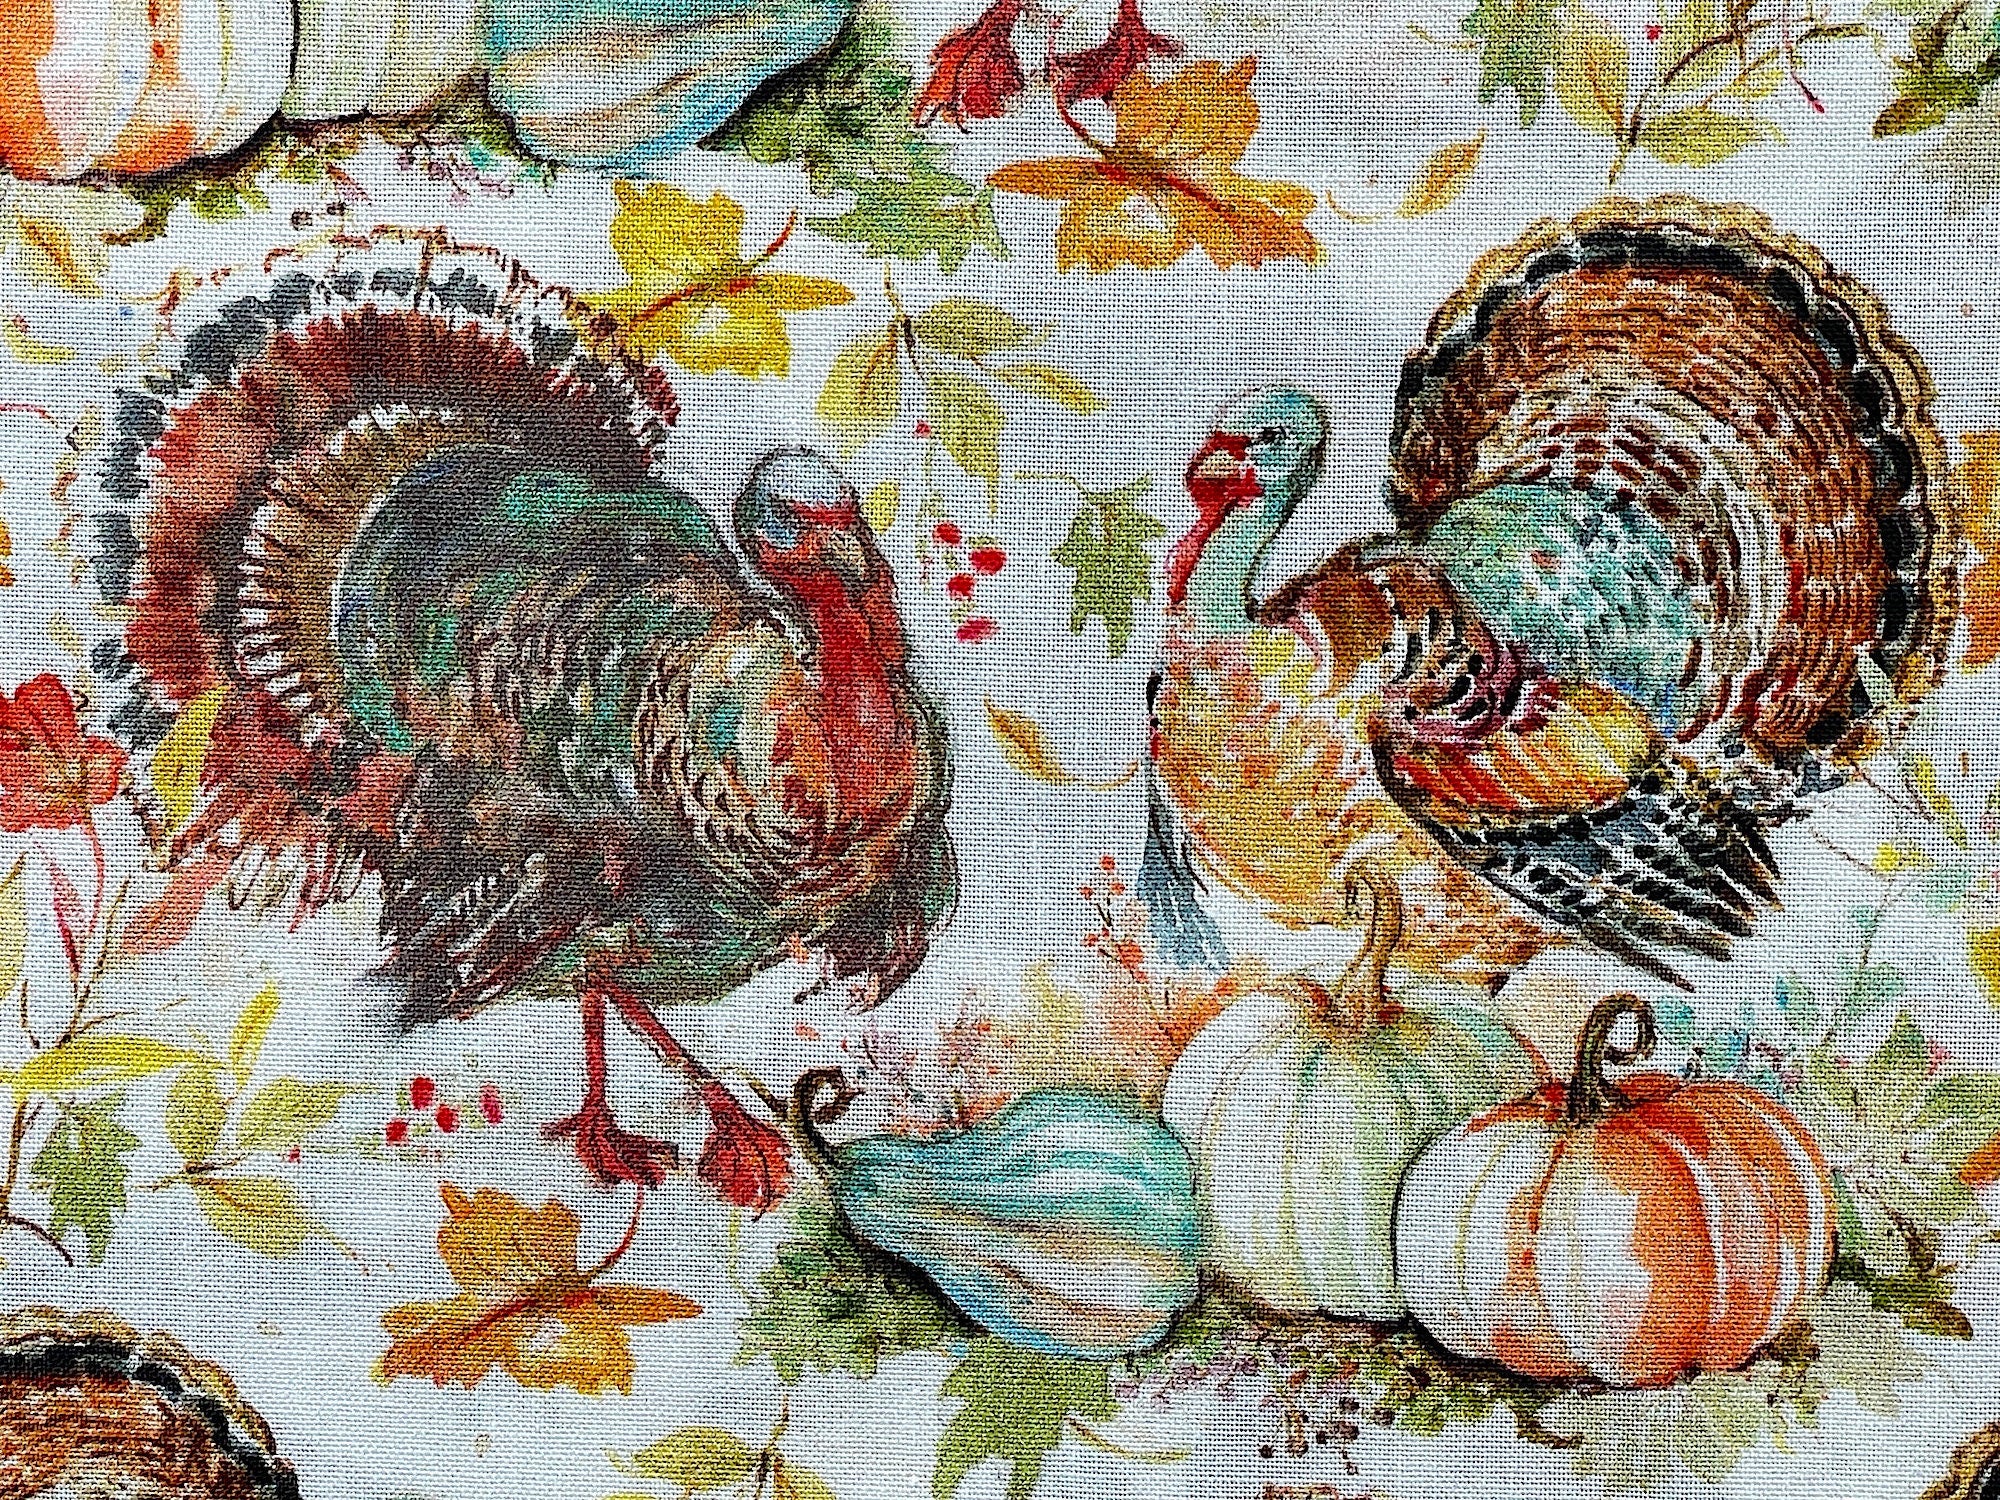 Close up of 2 turkeys, pumpkins and fall leaves.